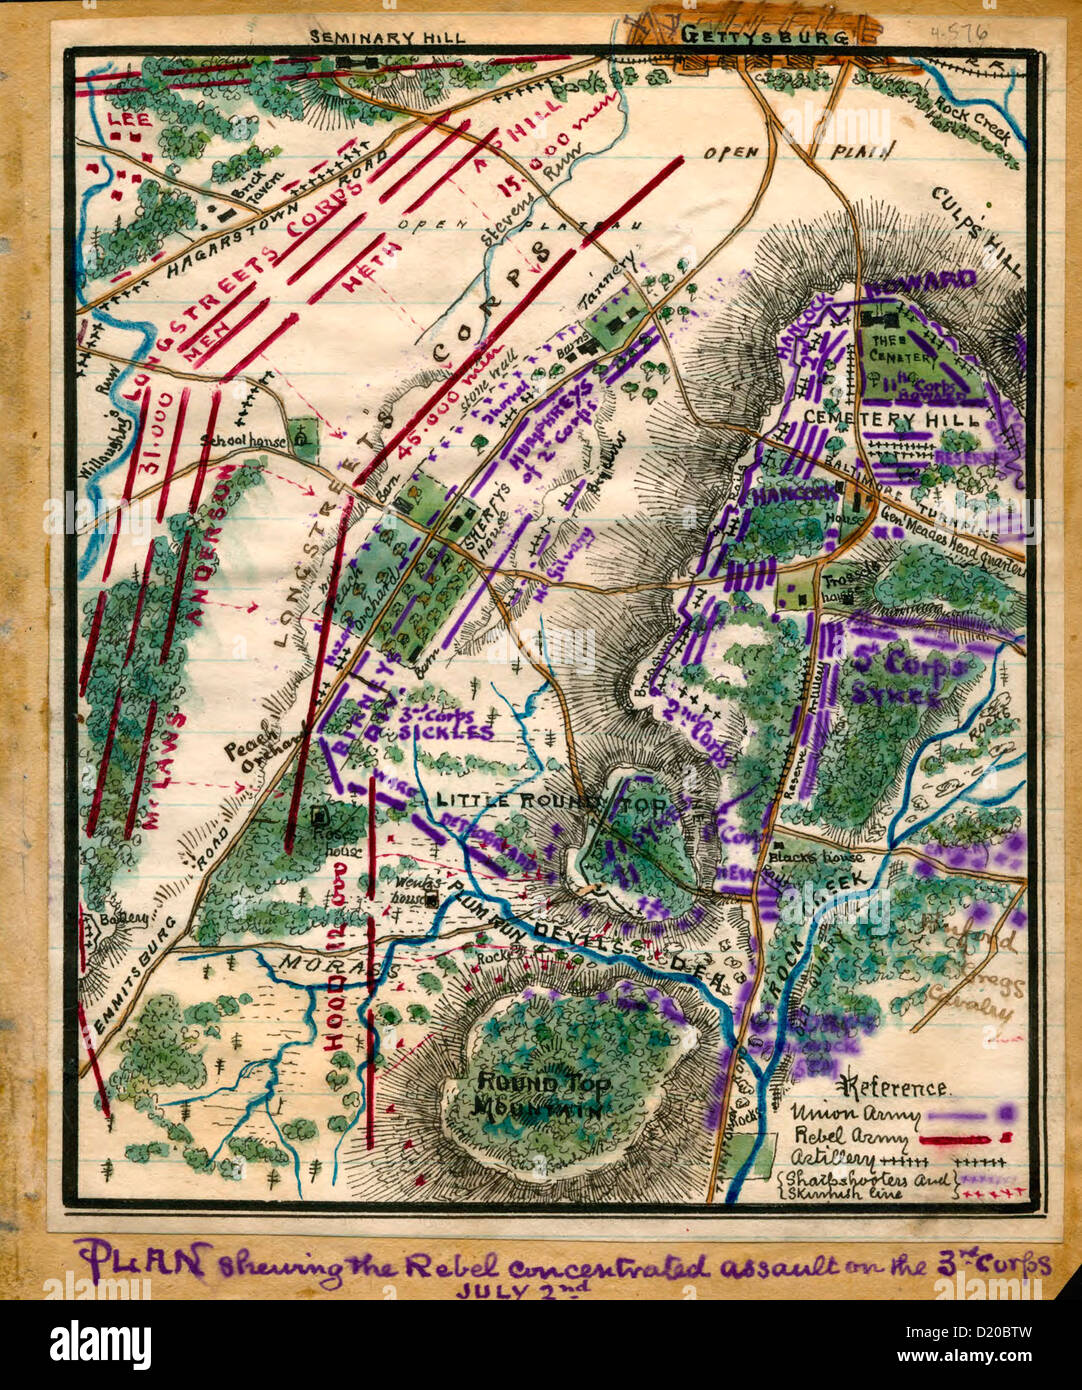 Map of Battle of Gettysburg Plan showing the Rebel concentrated assault on the 3rd Corps, July 2nd, 1863 USA Civil War Stock Photo